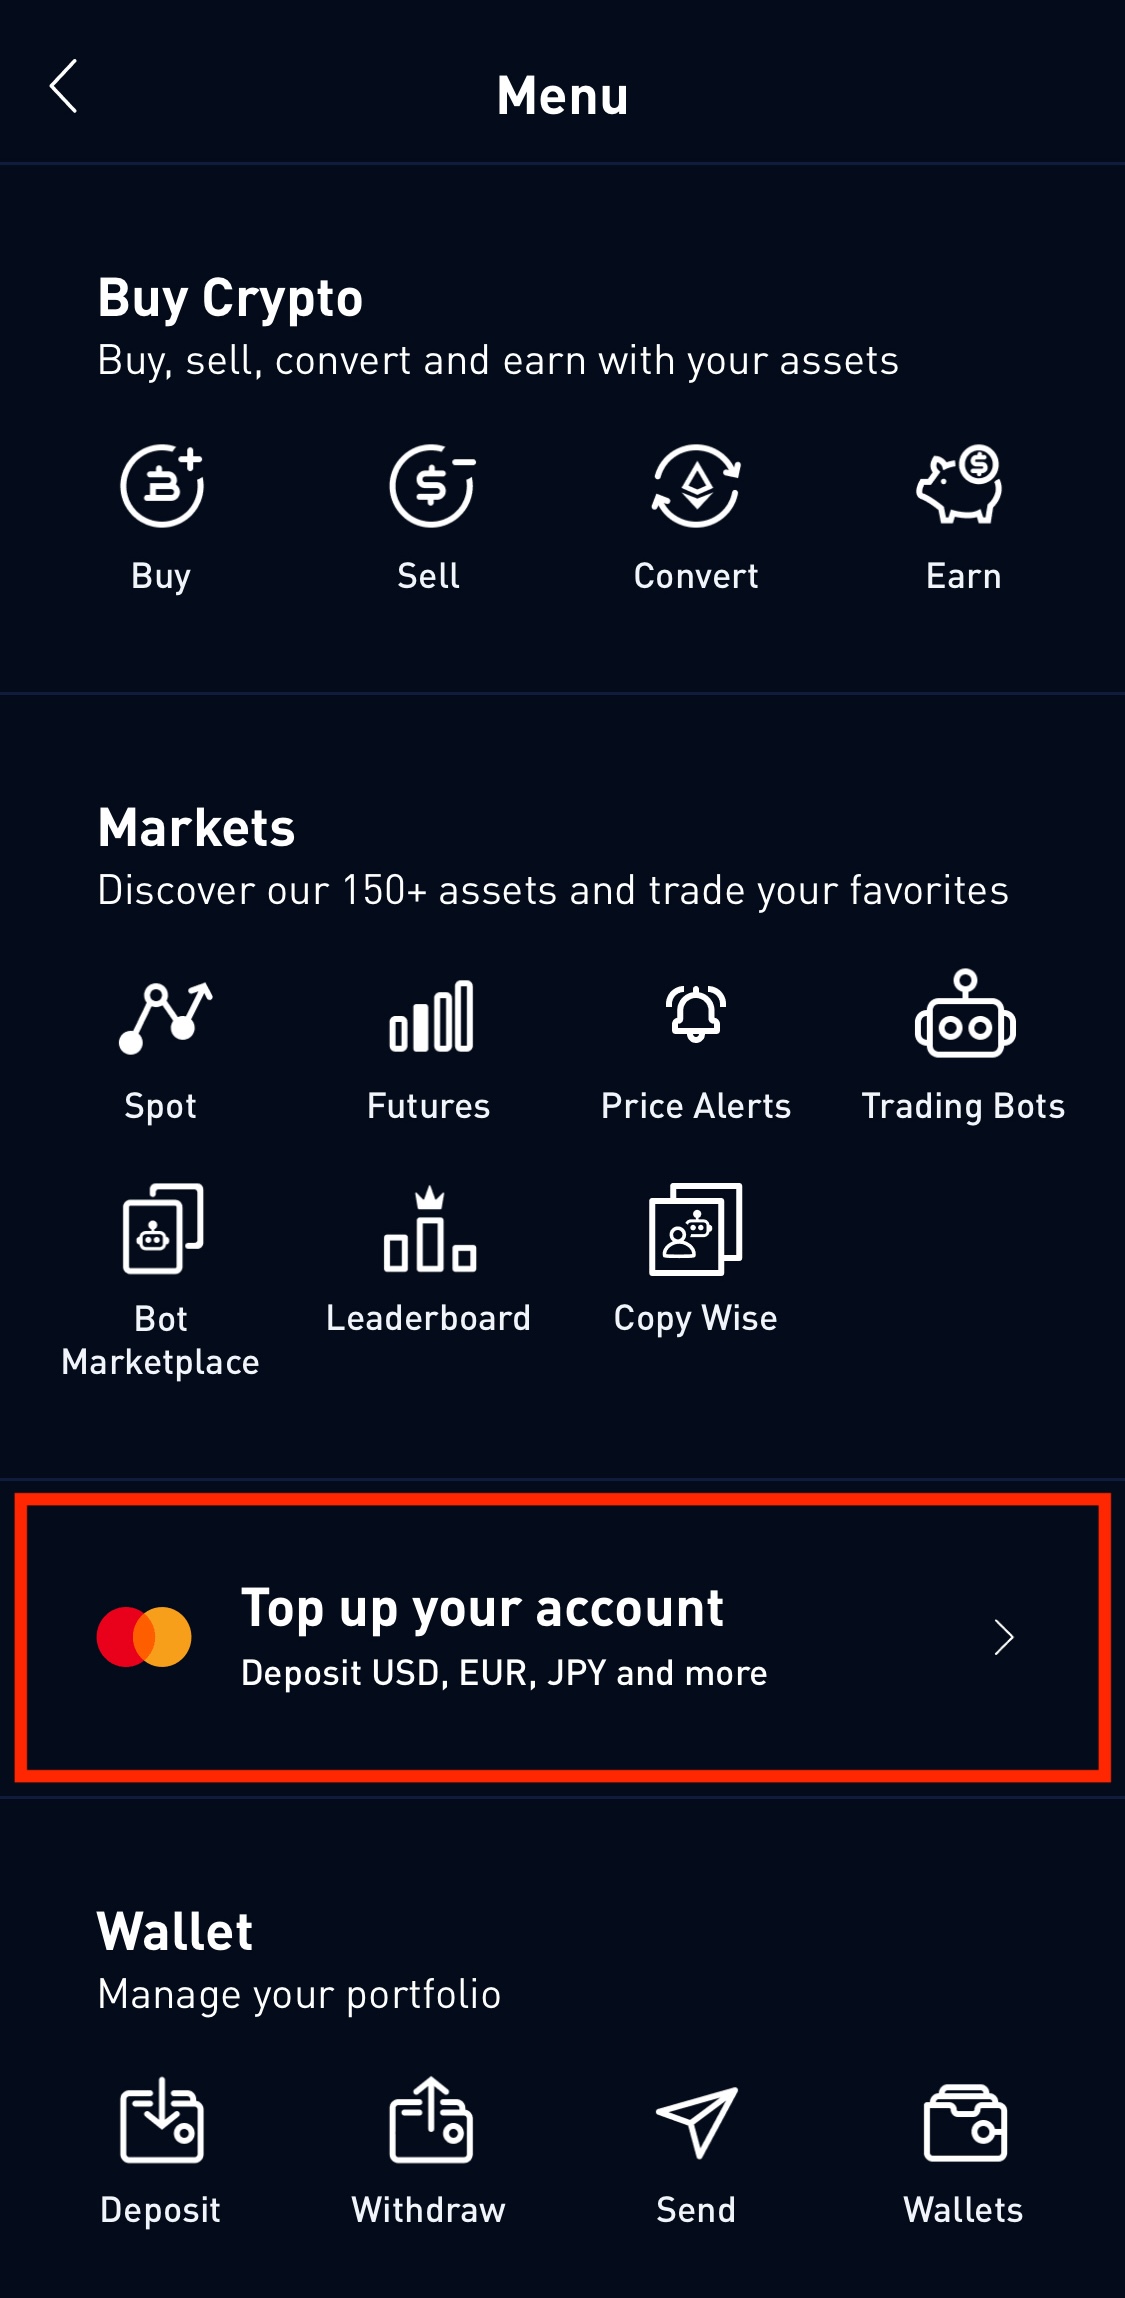 top up account button